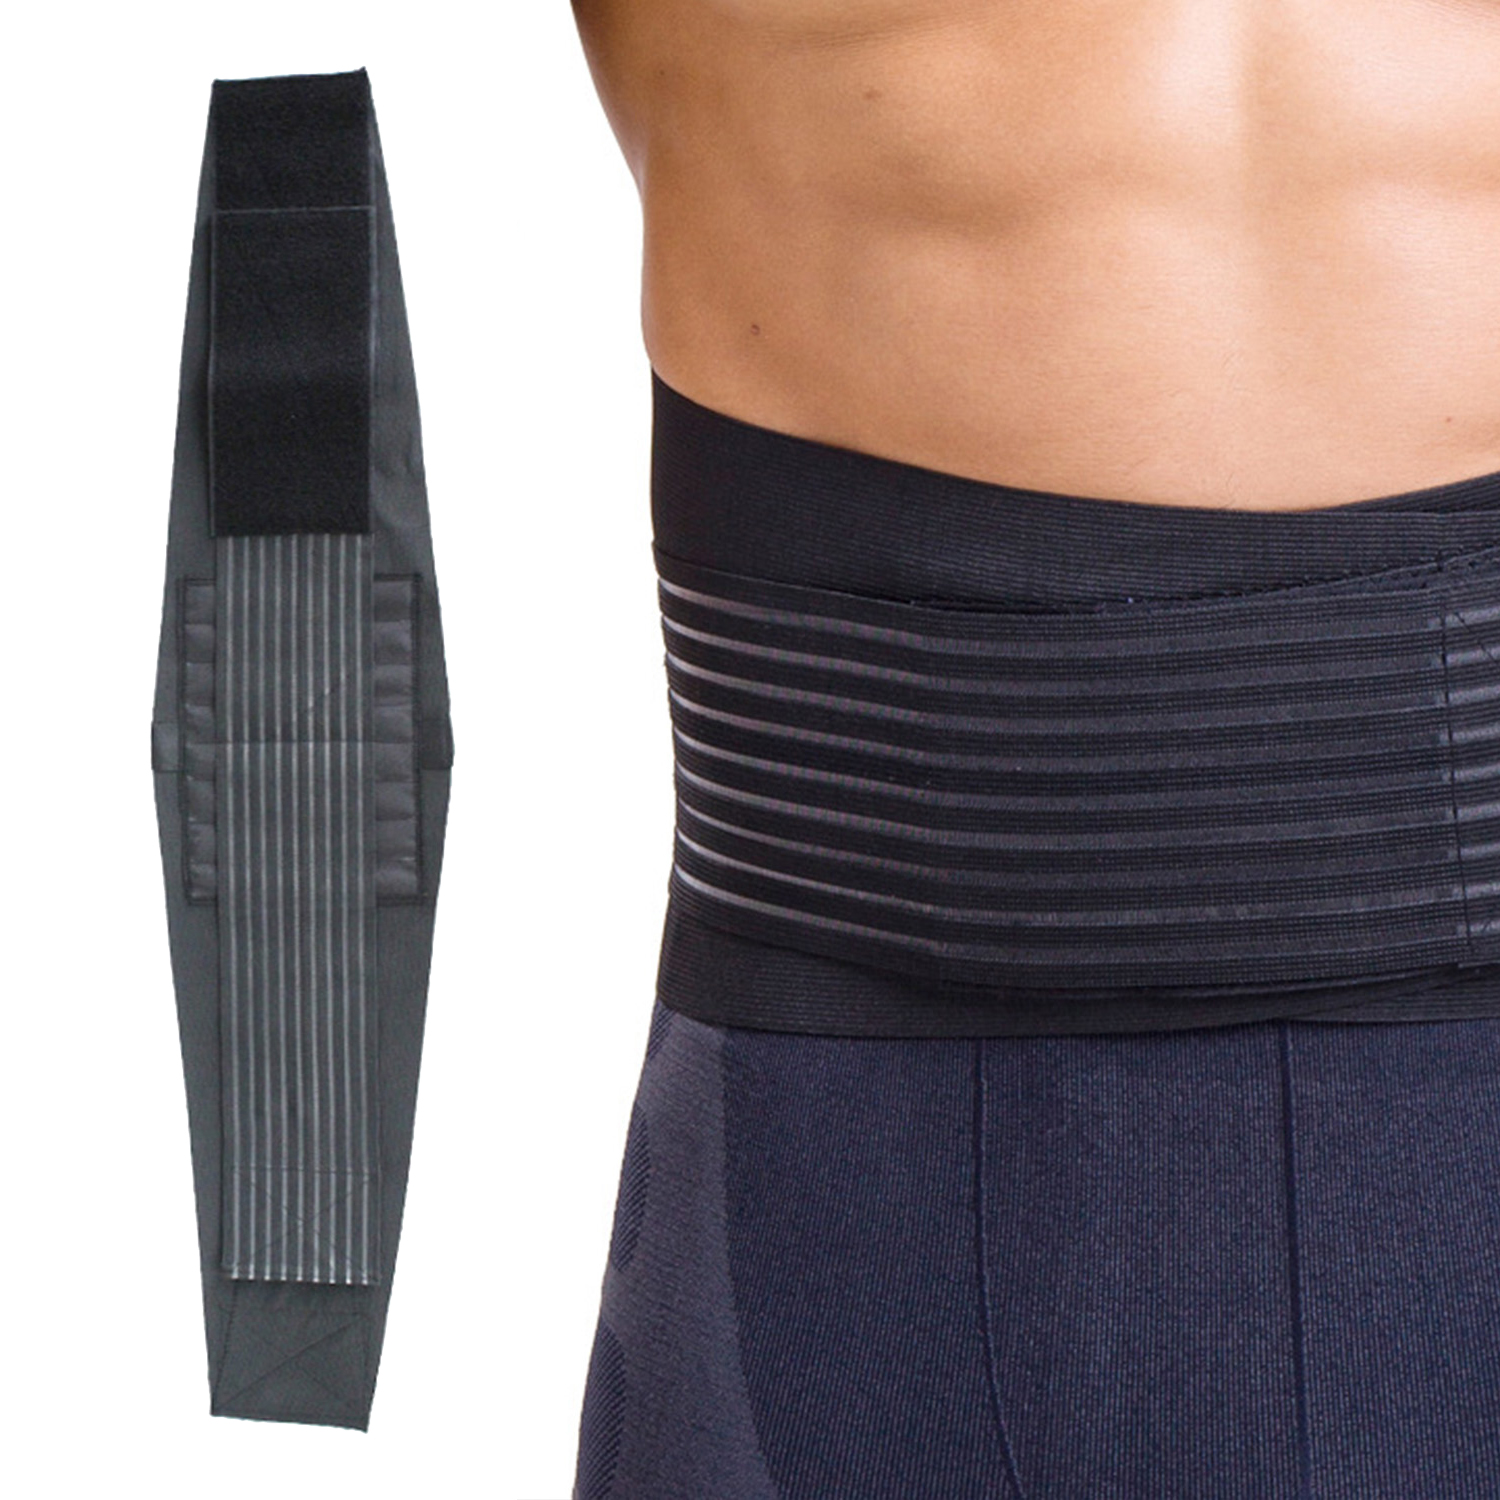 Men Waist Trainer Trimmer for Weight Loss Tummy Control Compression Body Shaper Belt